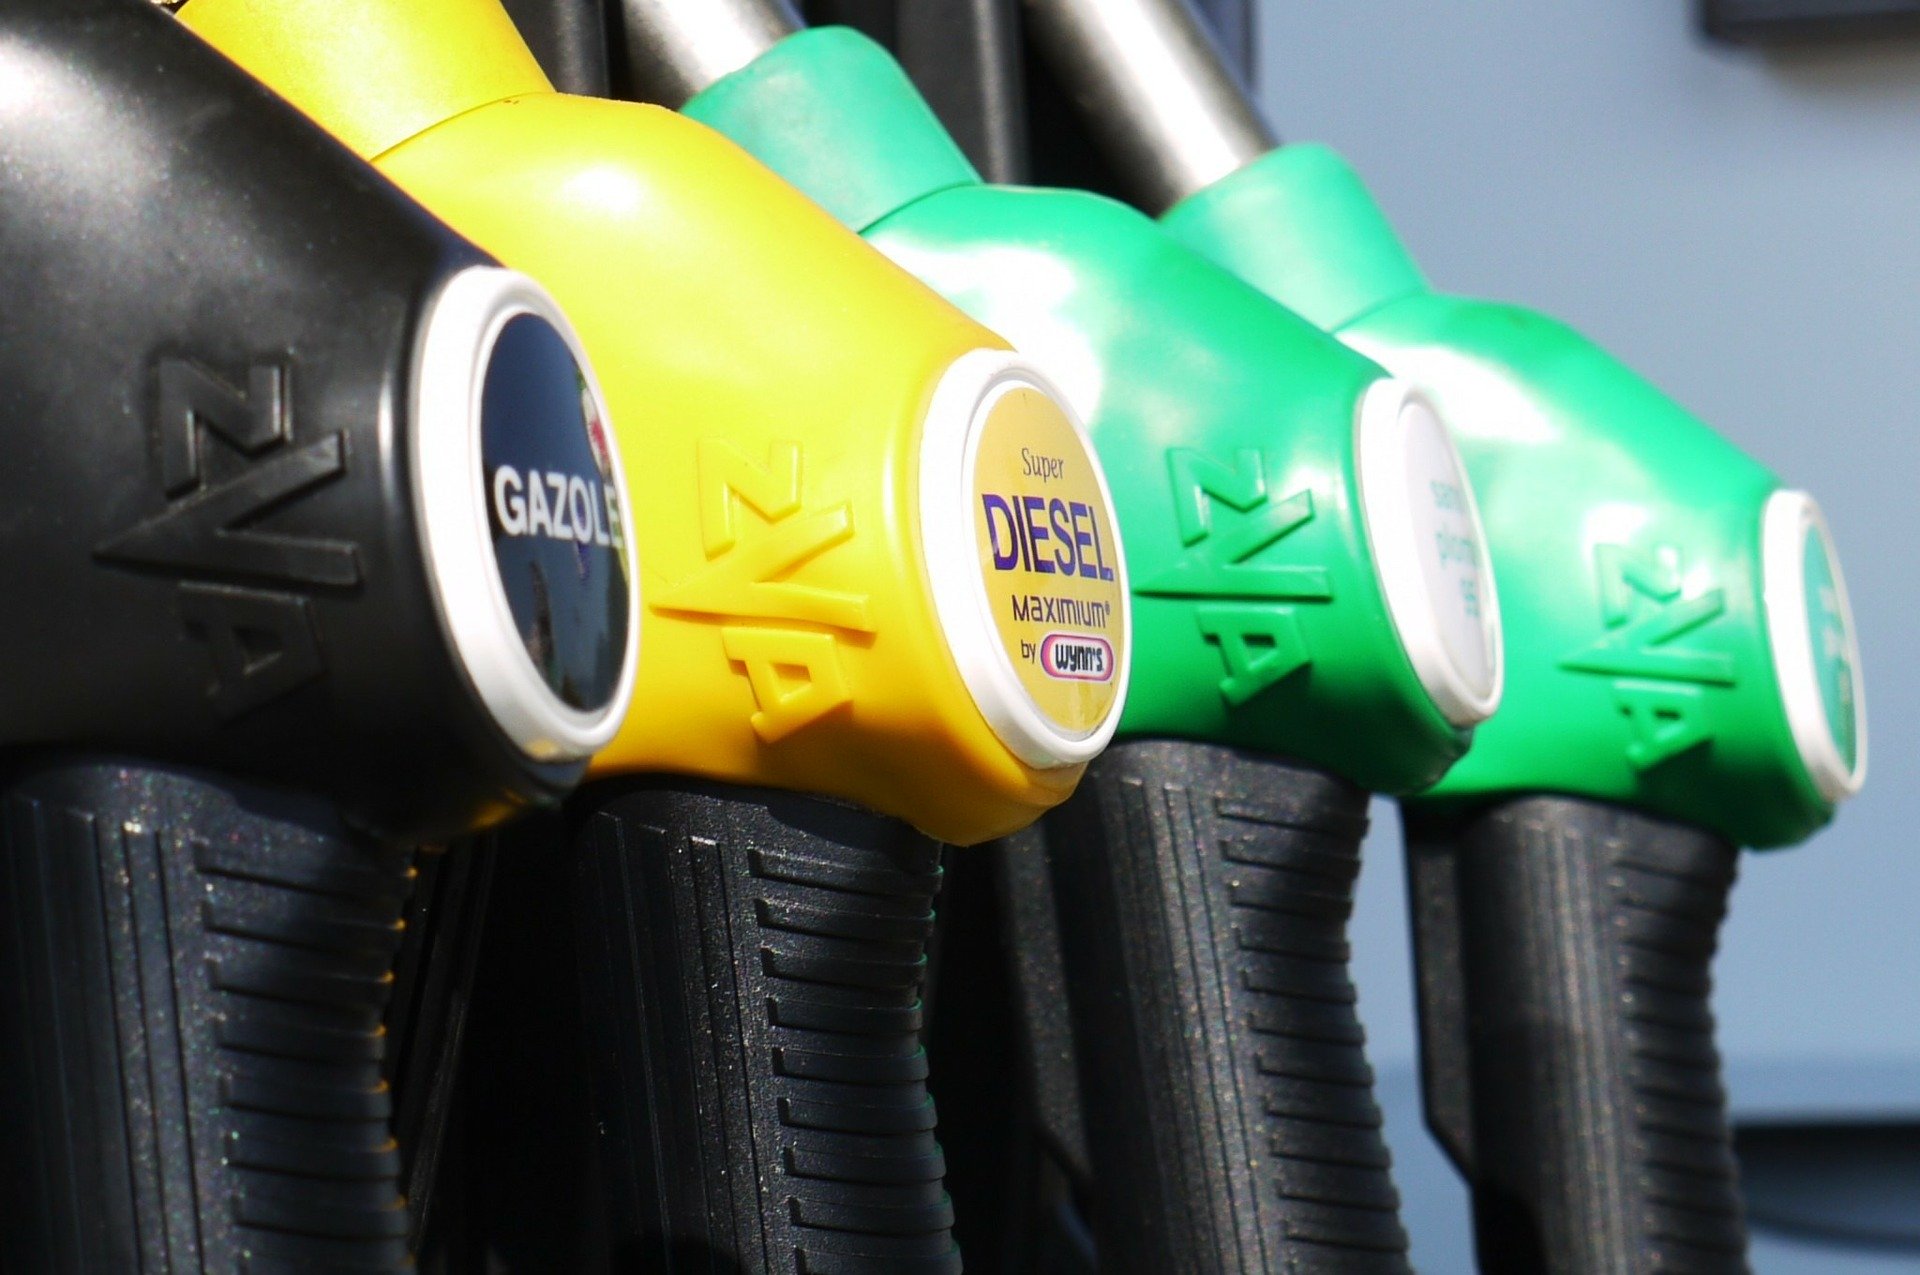 Petrol nozzles at the petrol station - petrol prices and Corona